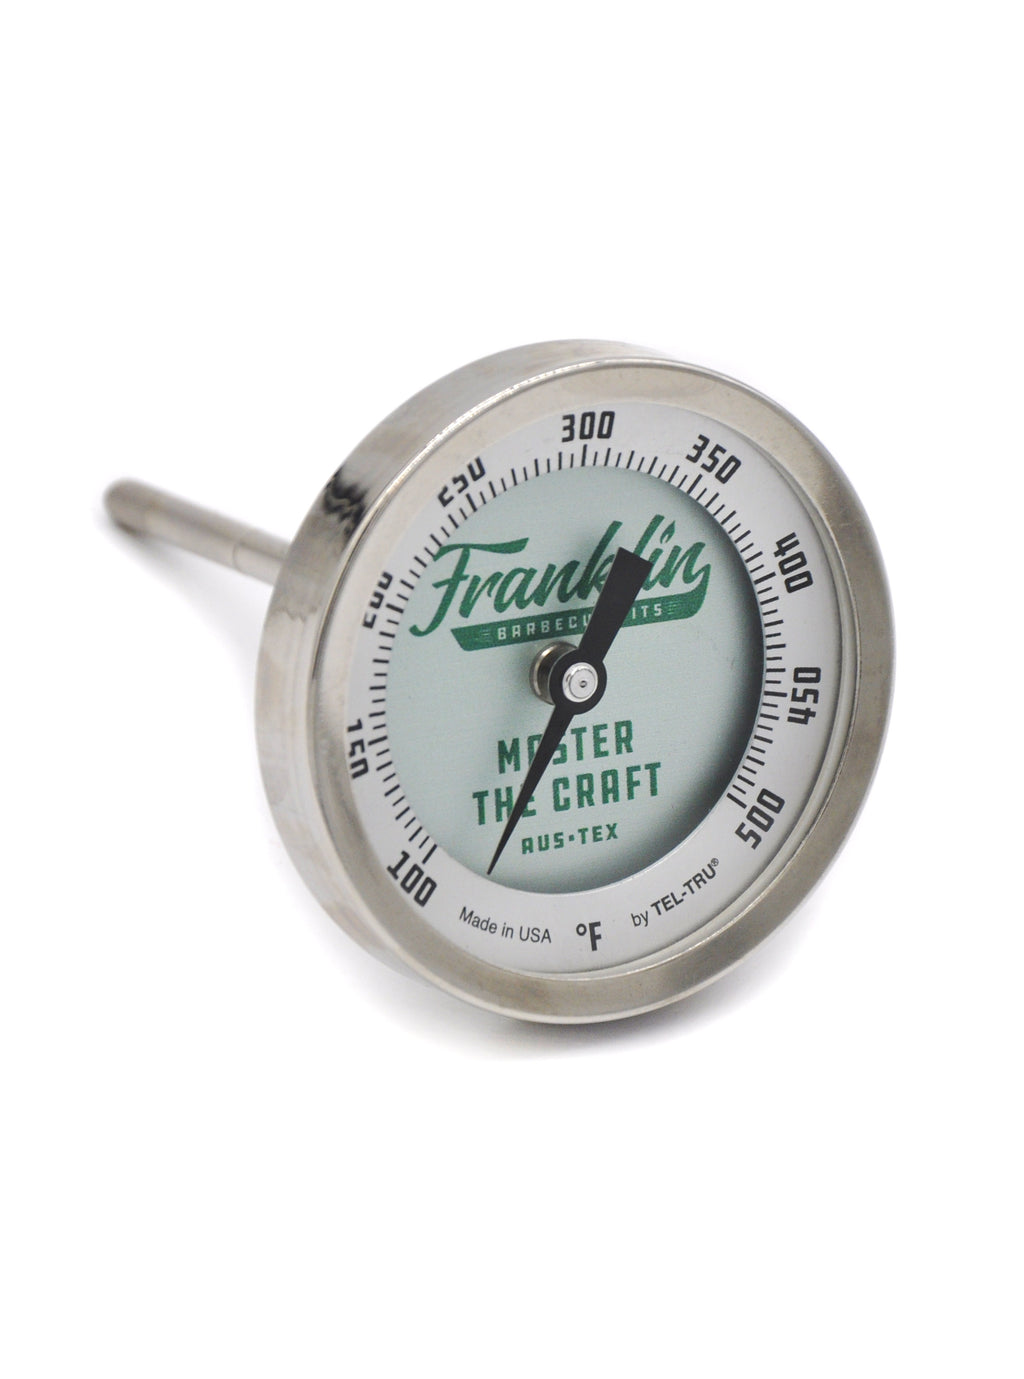 Franklin Barbecue Pits Weige® Trimming Knife